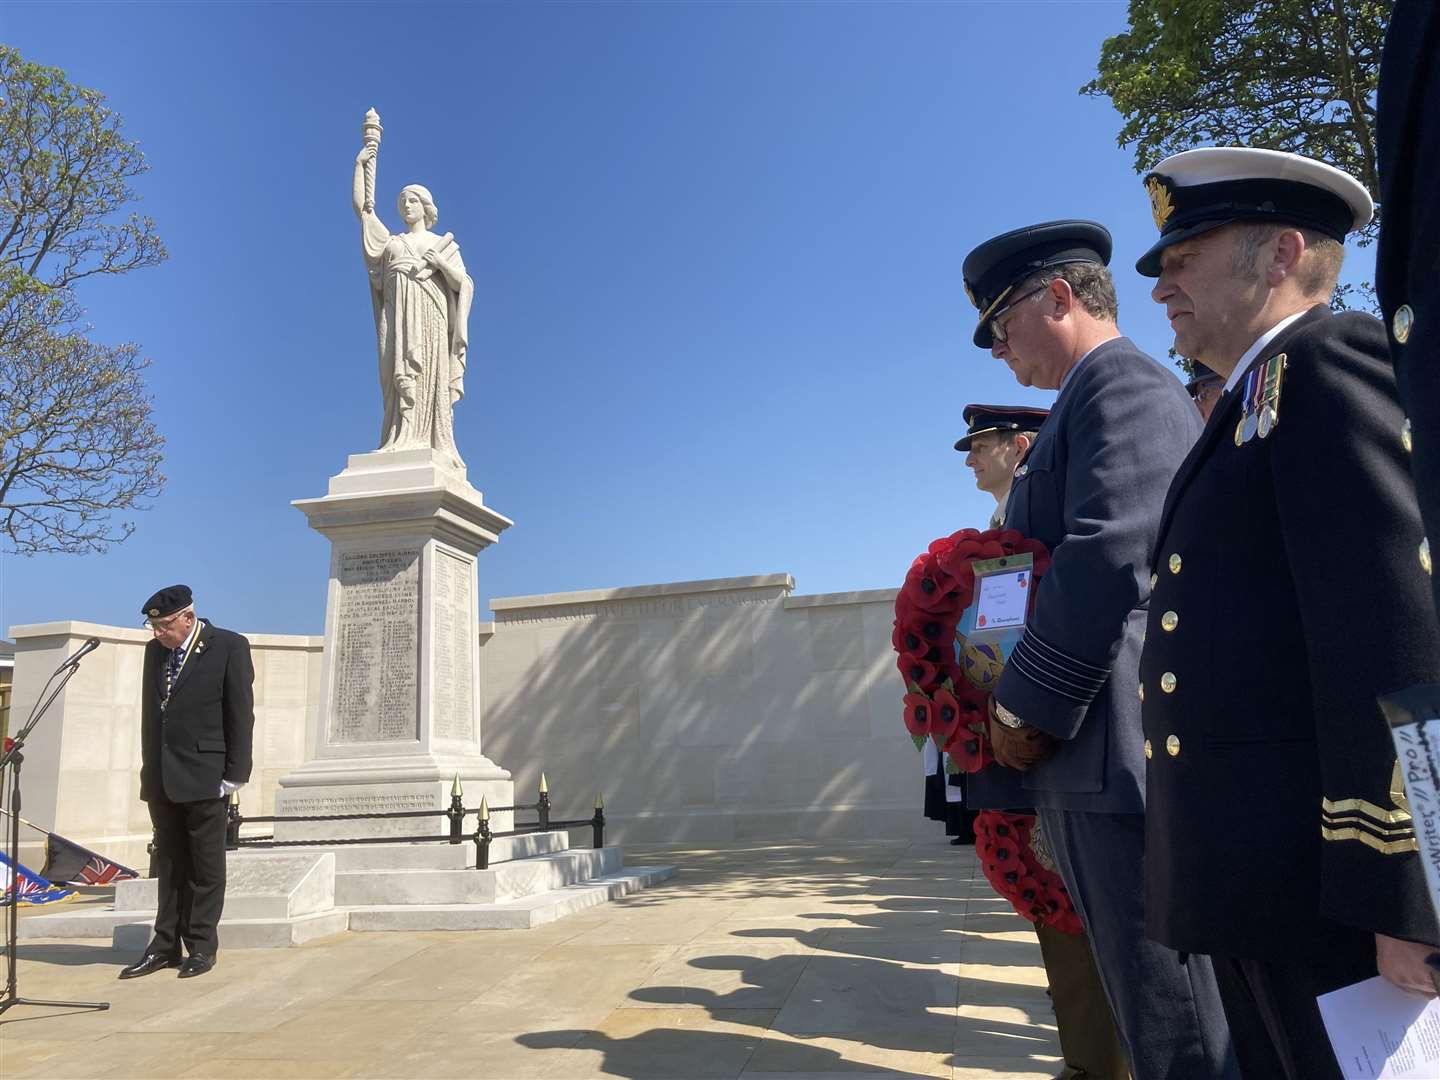 Quiet thoughts at the dedication of the new memorial wall in Sheerness